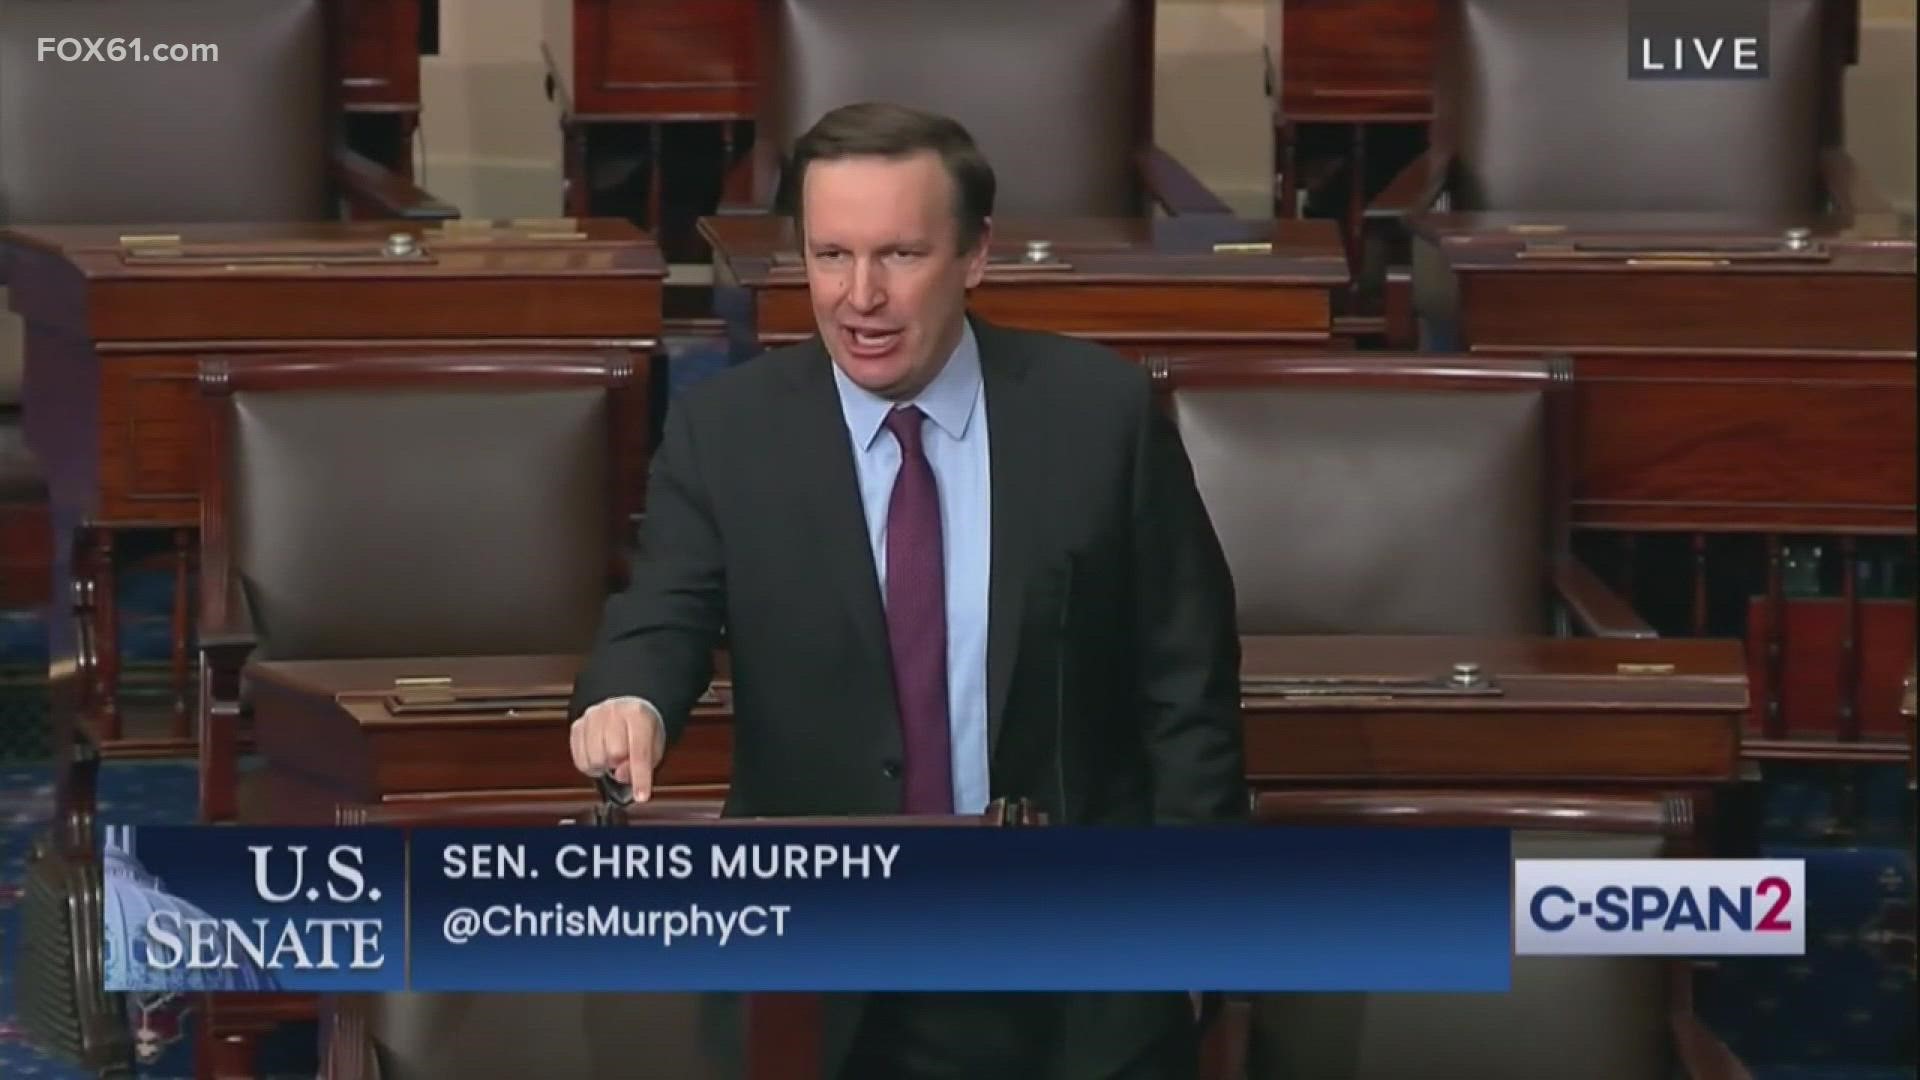 The U.S. Senator from Connecticut took to the Senate floor to share his thoughts on the latest school shooting in Michigan, and made another pitch for gun reform.